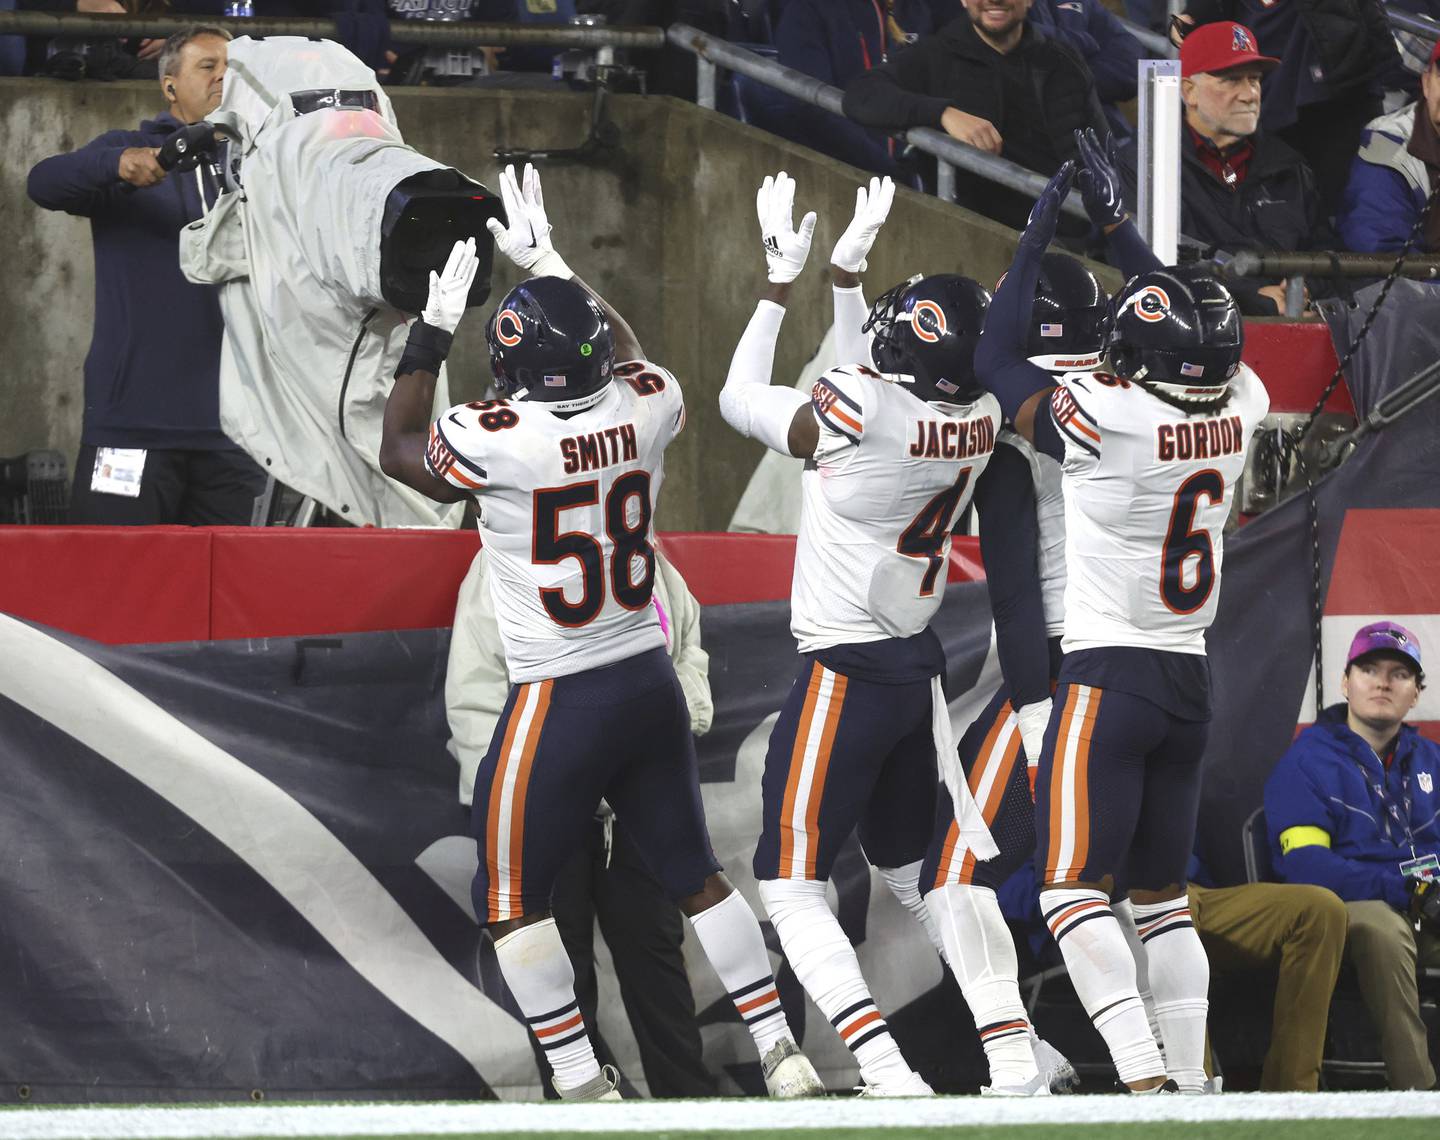 Bears linebacker Roquan Smith (58), safety Eddie Jackson (4) and cornerback Kyler Gordon (6) celebrate after an interception by Smith in the fourth quarter against the Patriots on Monday, Oct. 24, 2022, at Gillette Stadium in Foxborough, Mass.